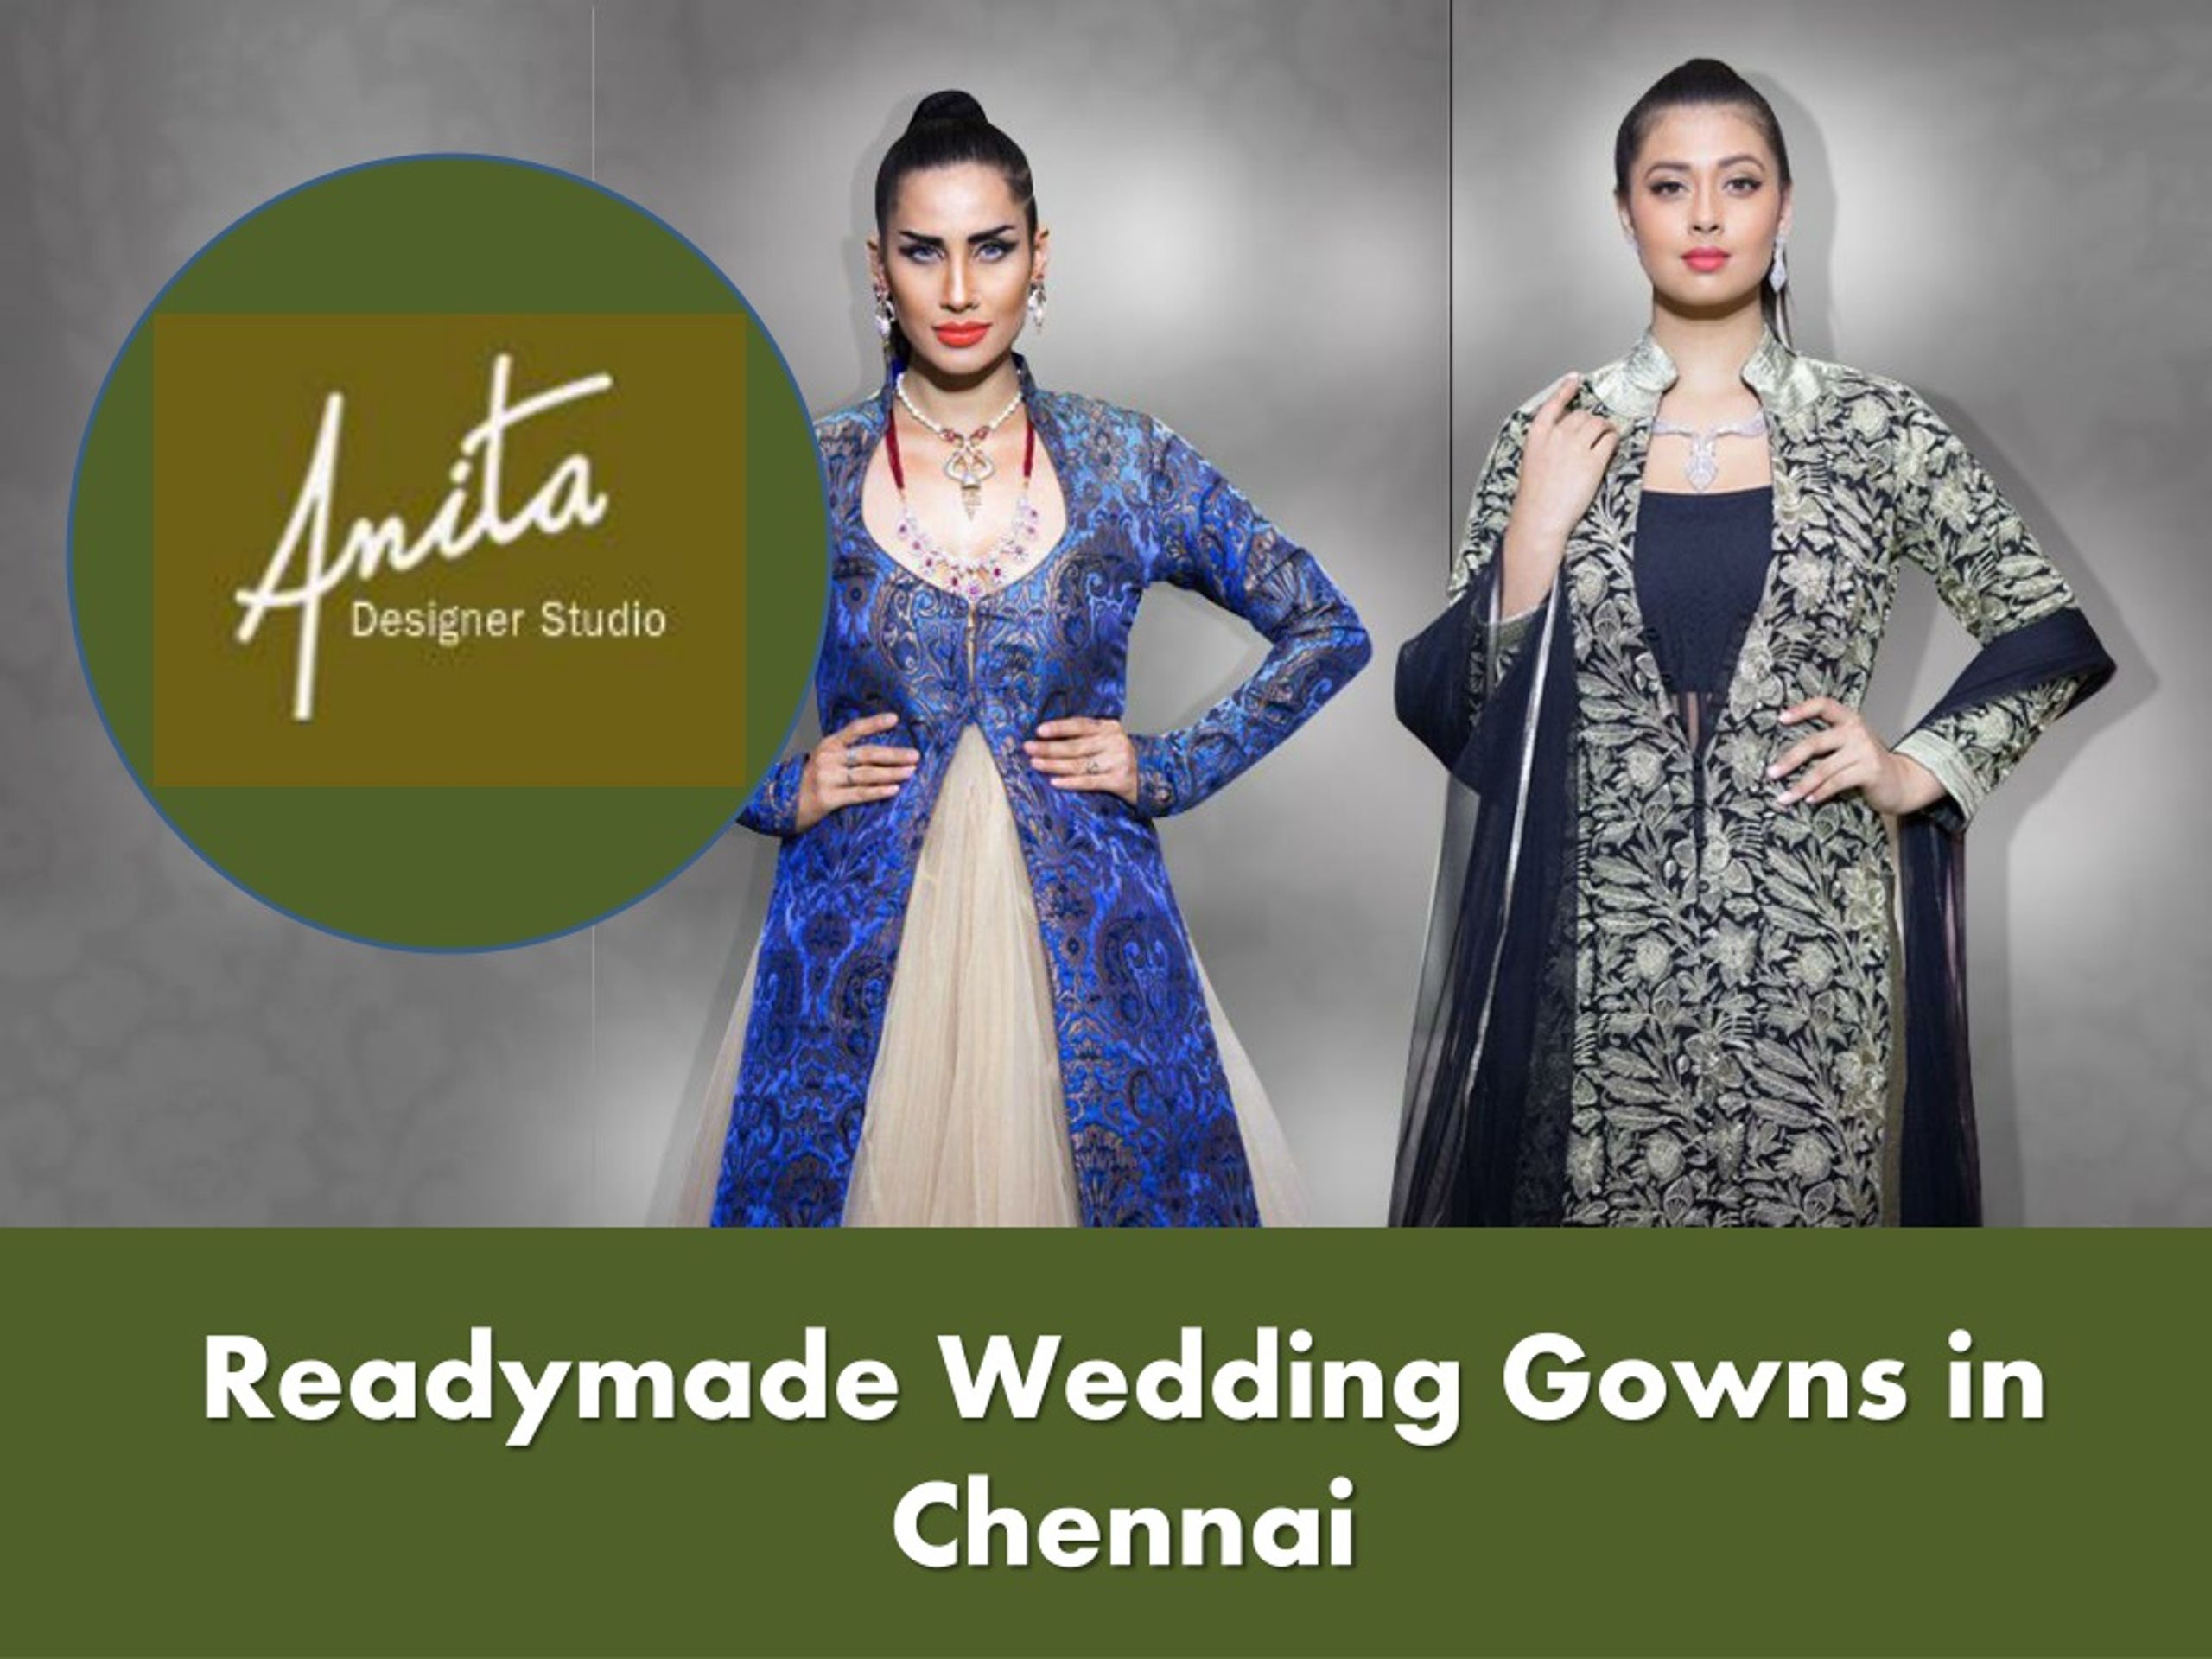 Chennai's Best place to Grab your Bridal Gowns | Vogue | Episode 1 - YouTube